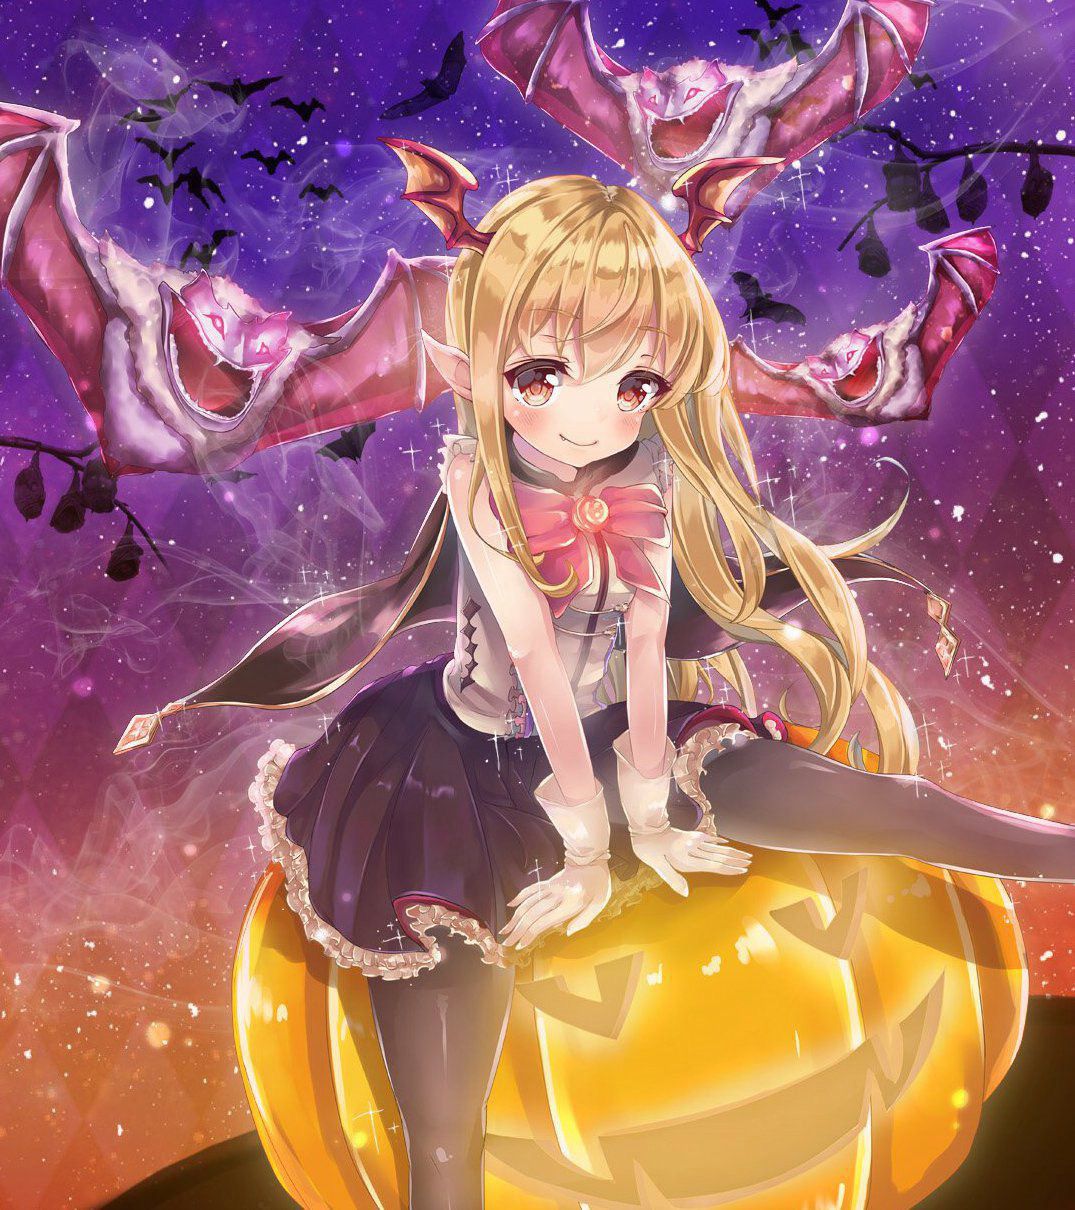 Vampy Chan (secondary-ZIP) to put on the shoes and cute images together "of God bahamut and grumble fantasy." 38